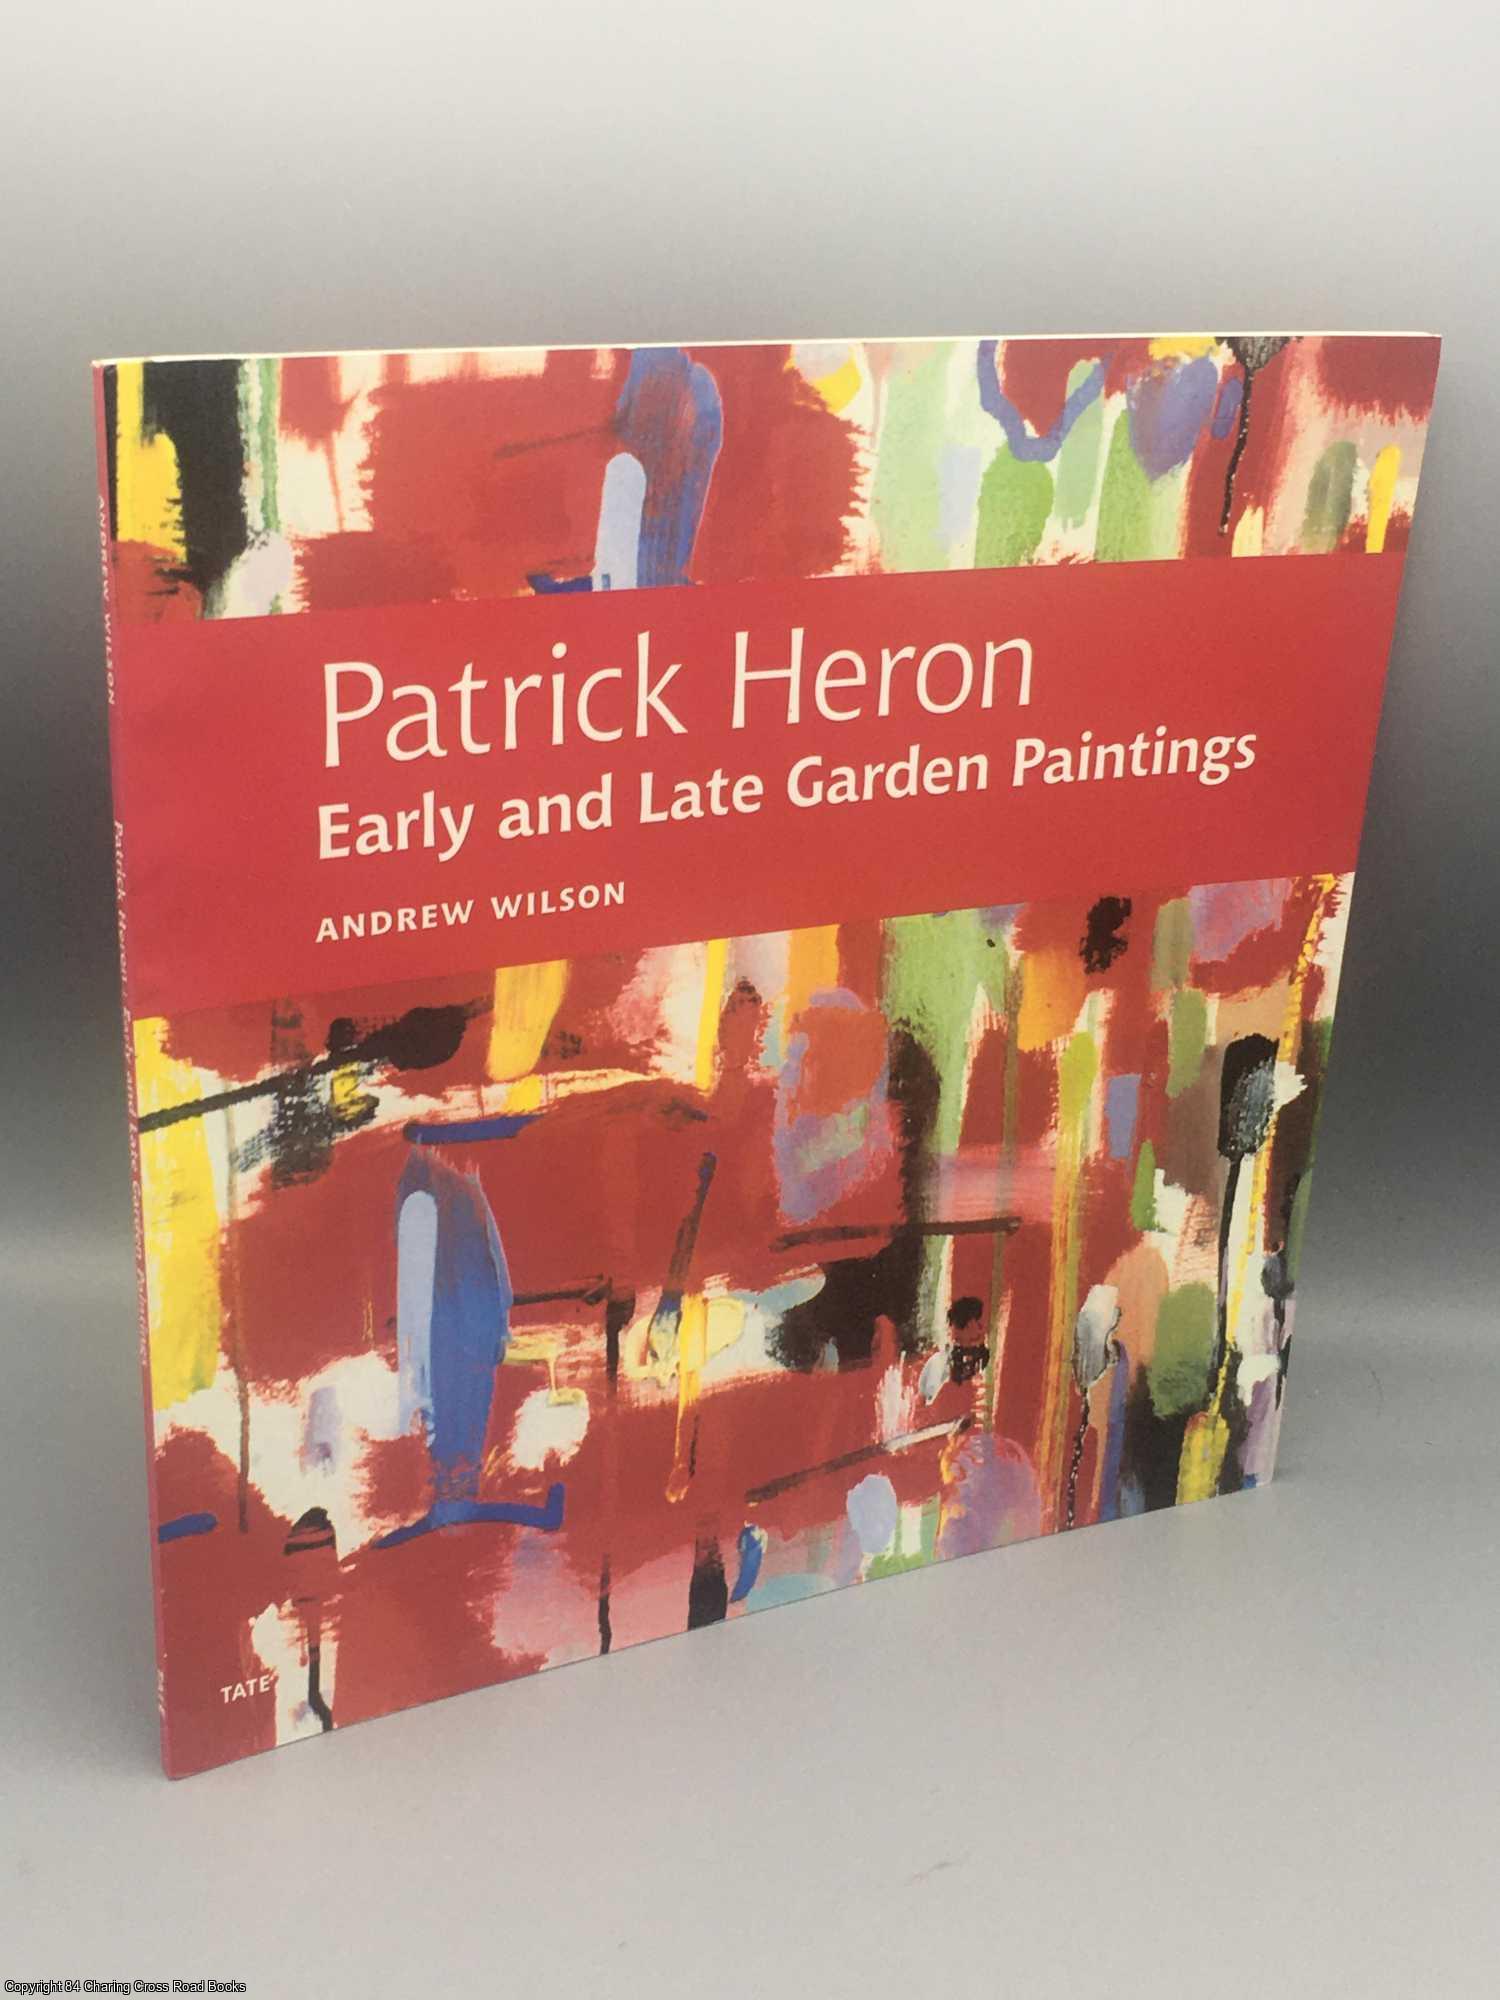 Wilson, Andrew - Patrick Heron: Early and Late Garden Paintings